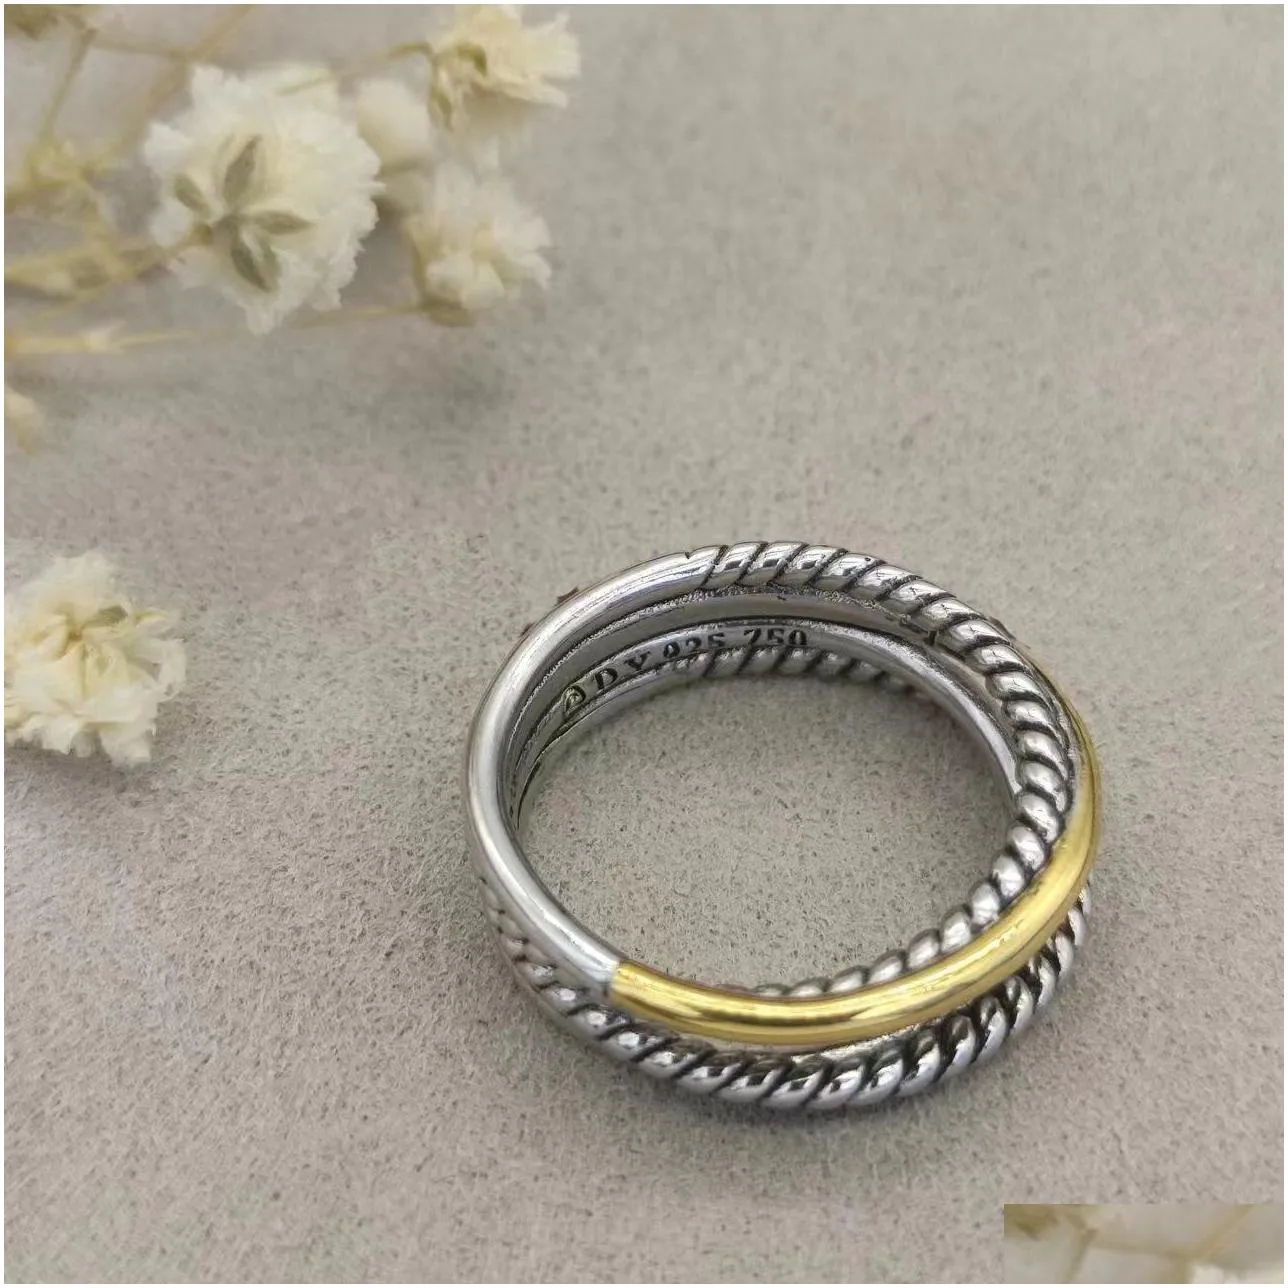 New DY Twisted Vintage band designer Rings for women men with Diamonds 925 Sterling Silver Sunflower luxury 14k Gold Plating Engagement gemstone dy Ring jewelry